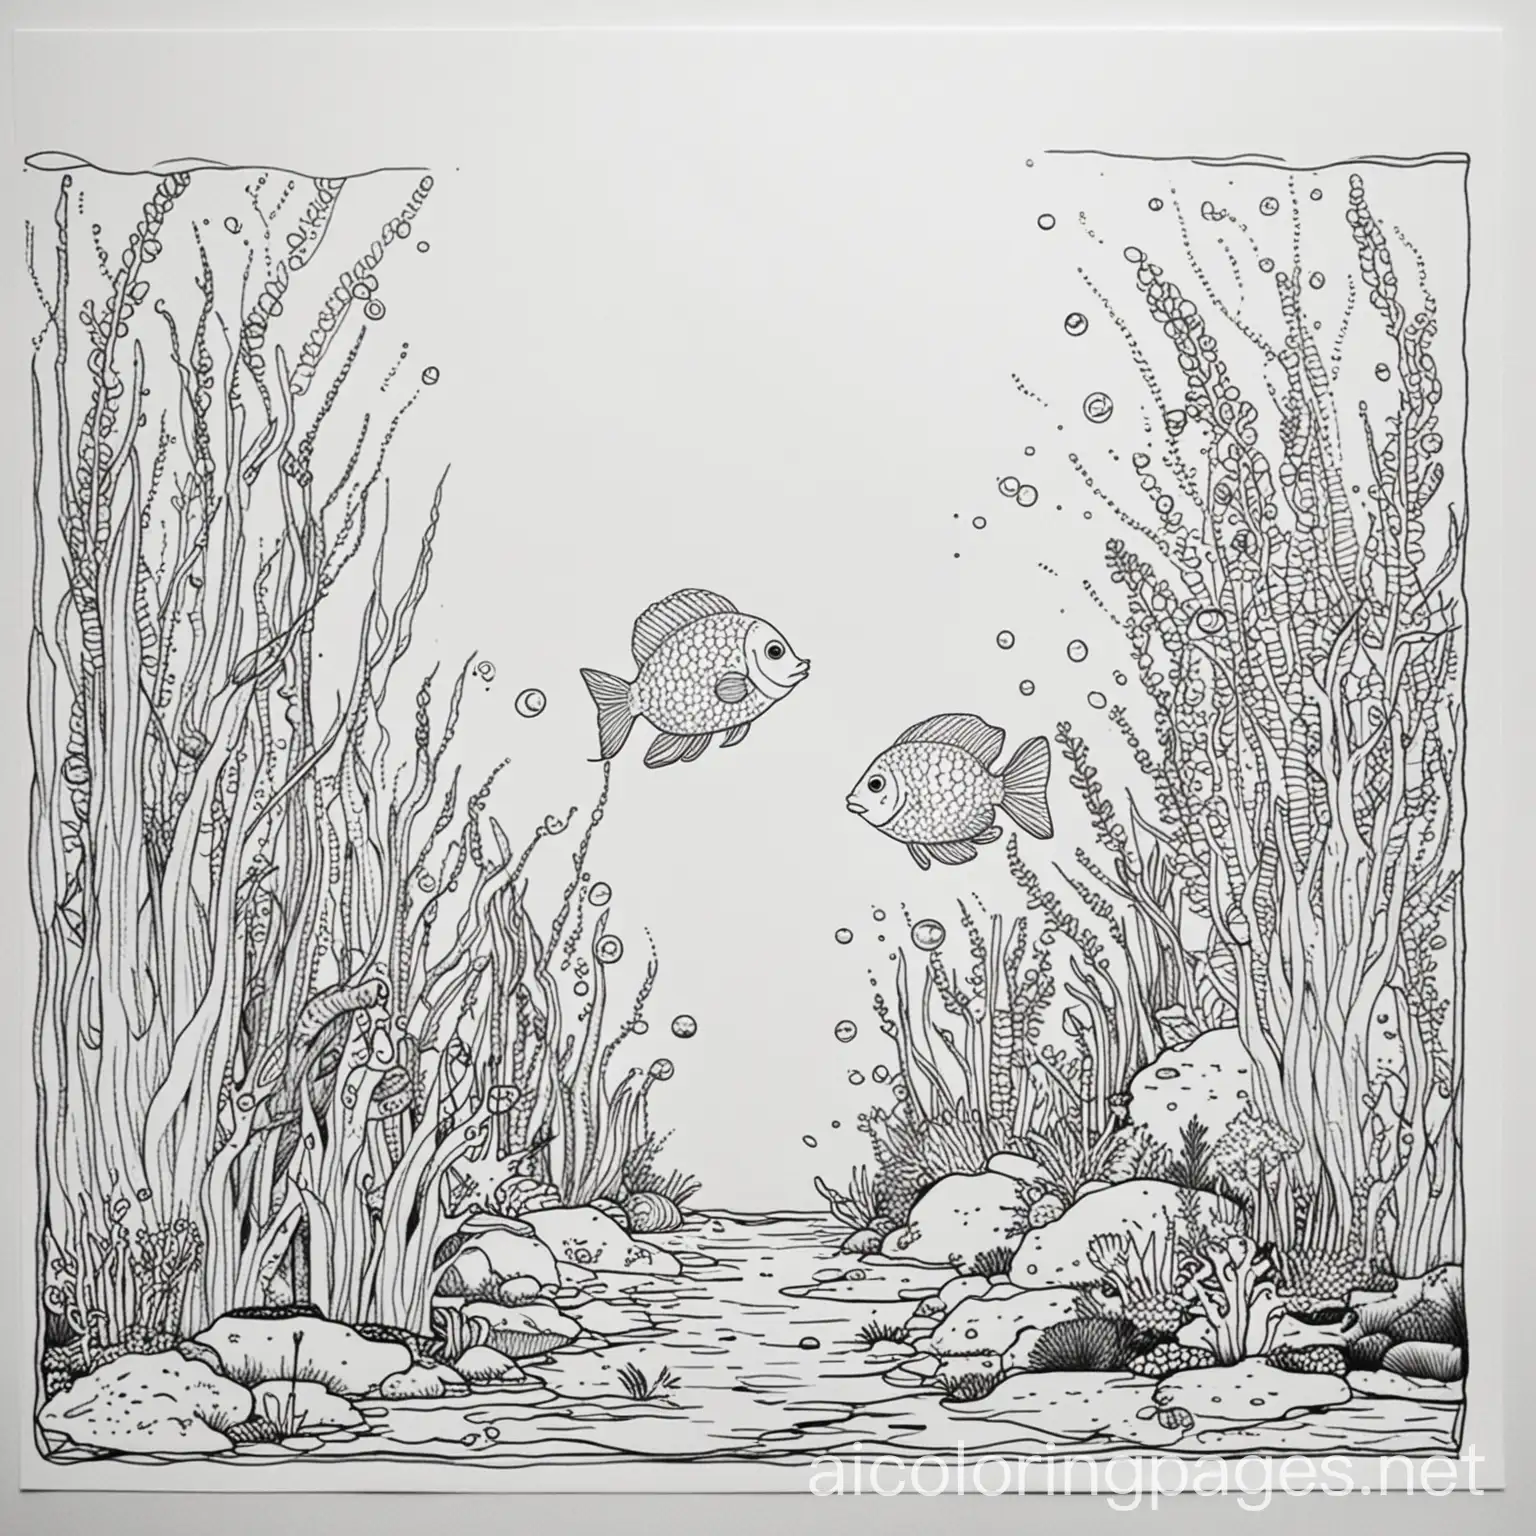 easy aquarium tidepools coloring page, Coloring Page: black and white, line art, white background, Simplicity, Ample White Space. The background of the coloring page is plain white to make it easy for young children to color within the lines. The outlines of all the subjects are easy to distinguish, making it simple for kids to color without too much difficulty